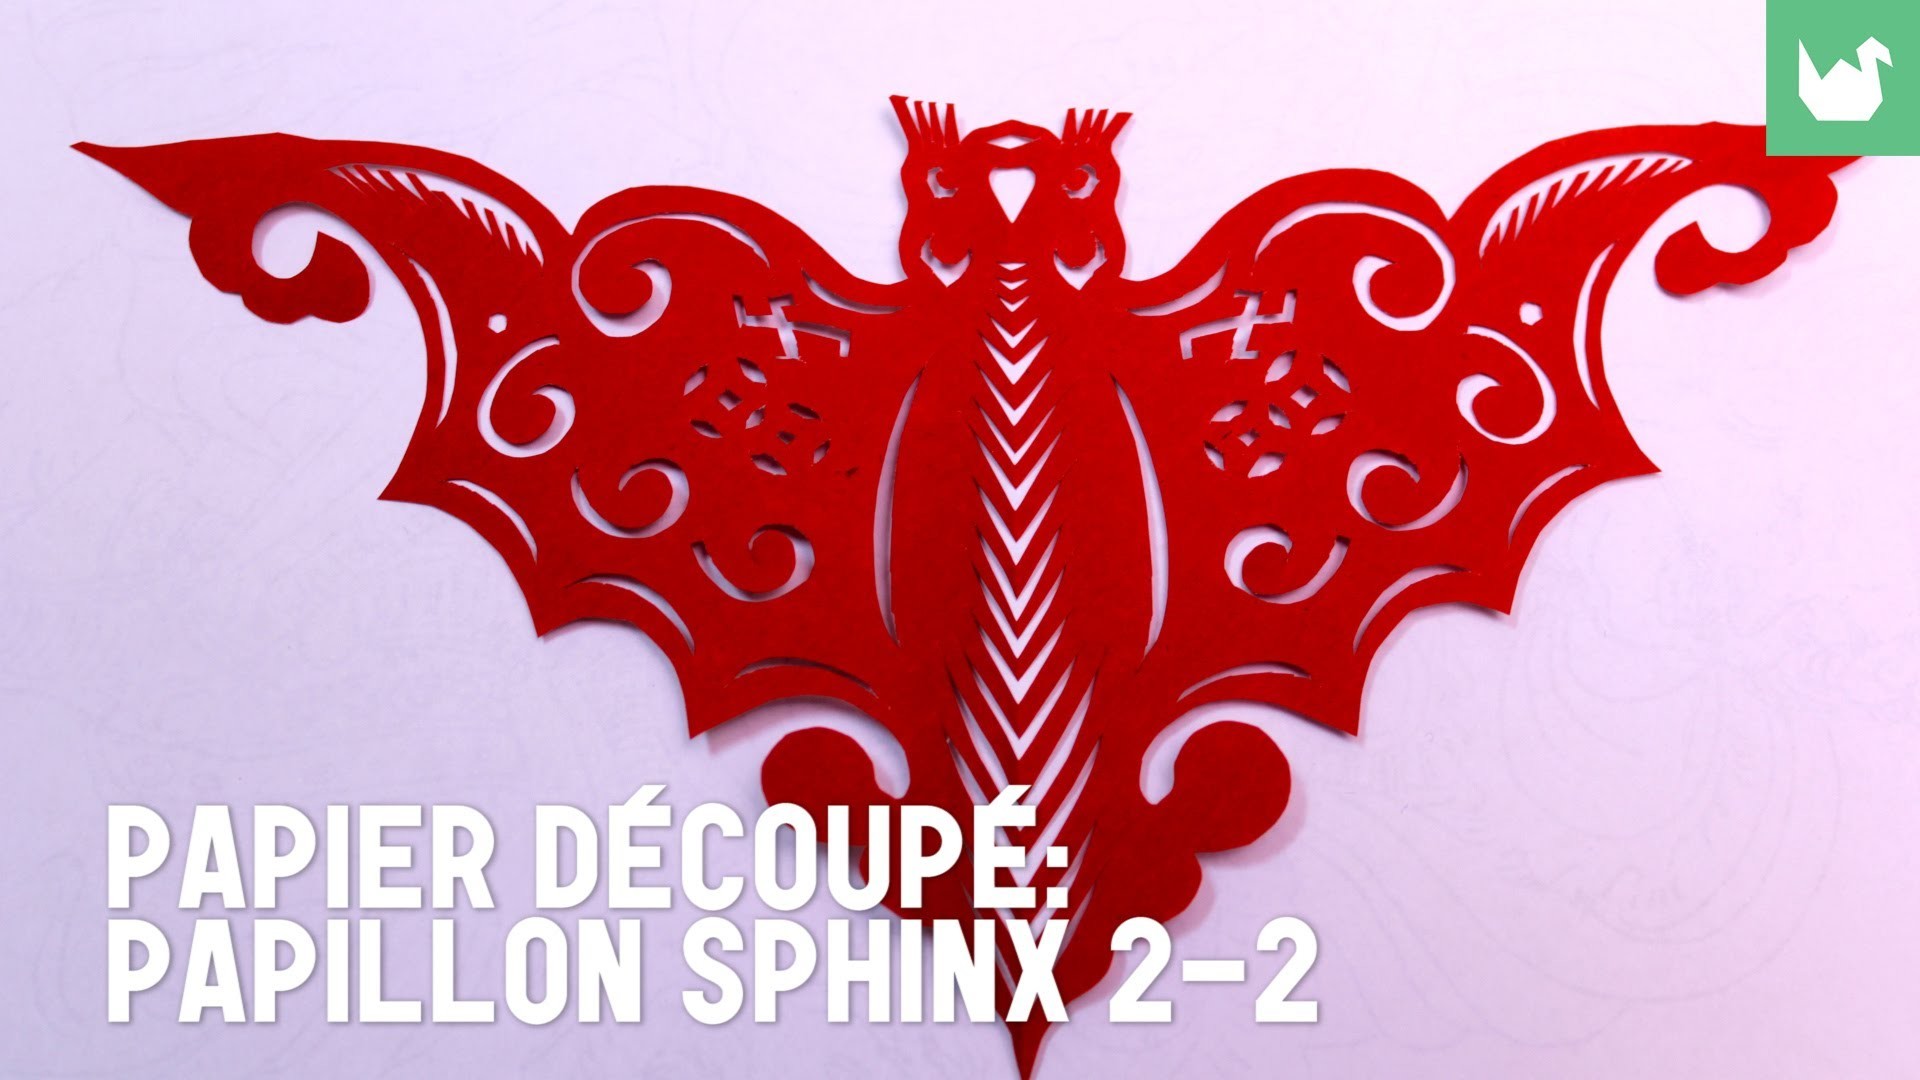 Découpage traditionnel chinois : Papillon Sphinx 2-2 - HD